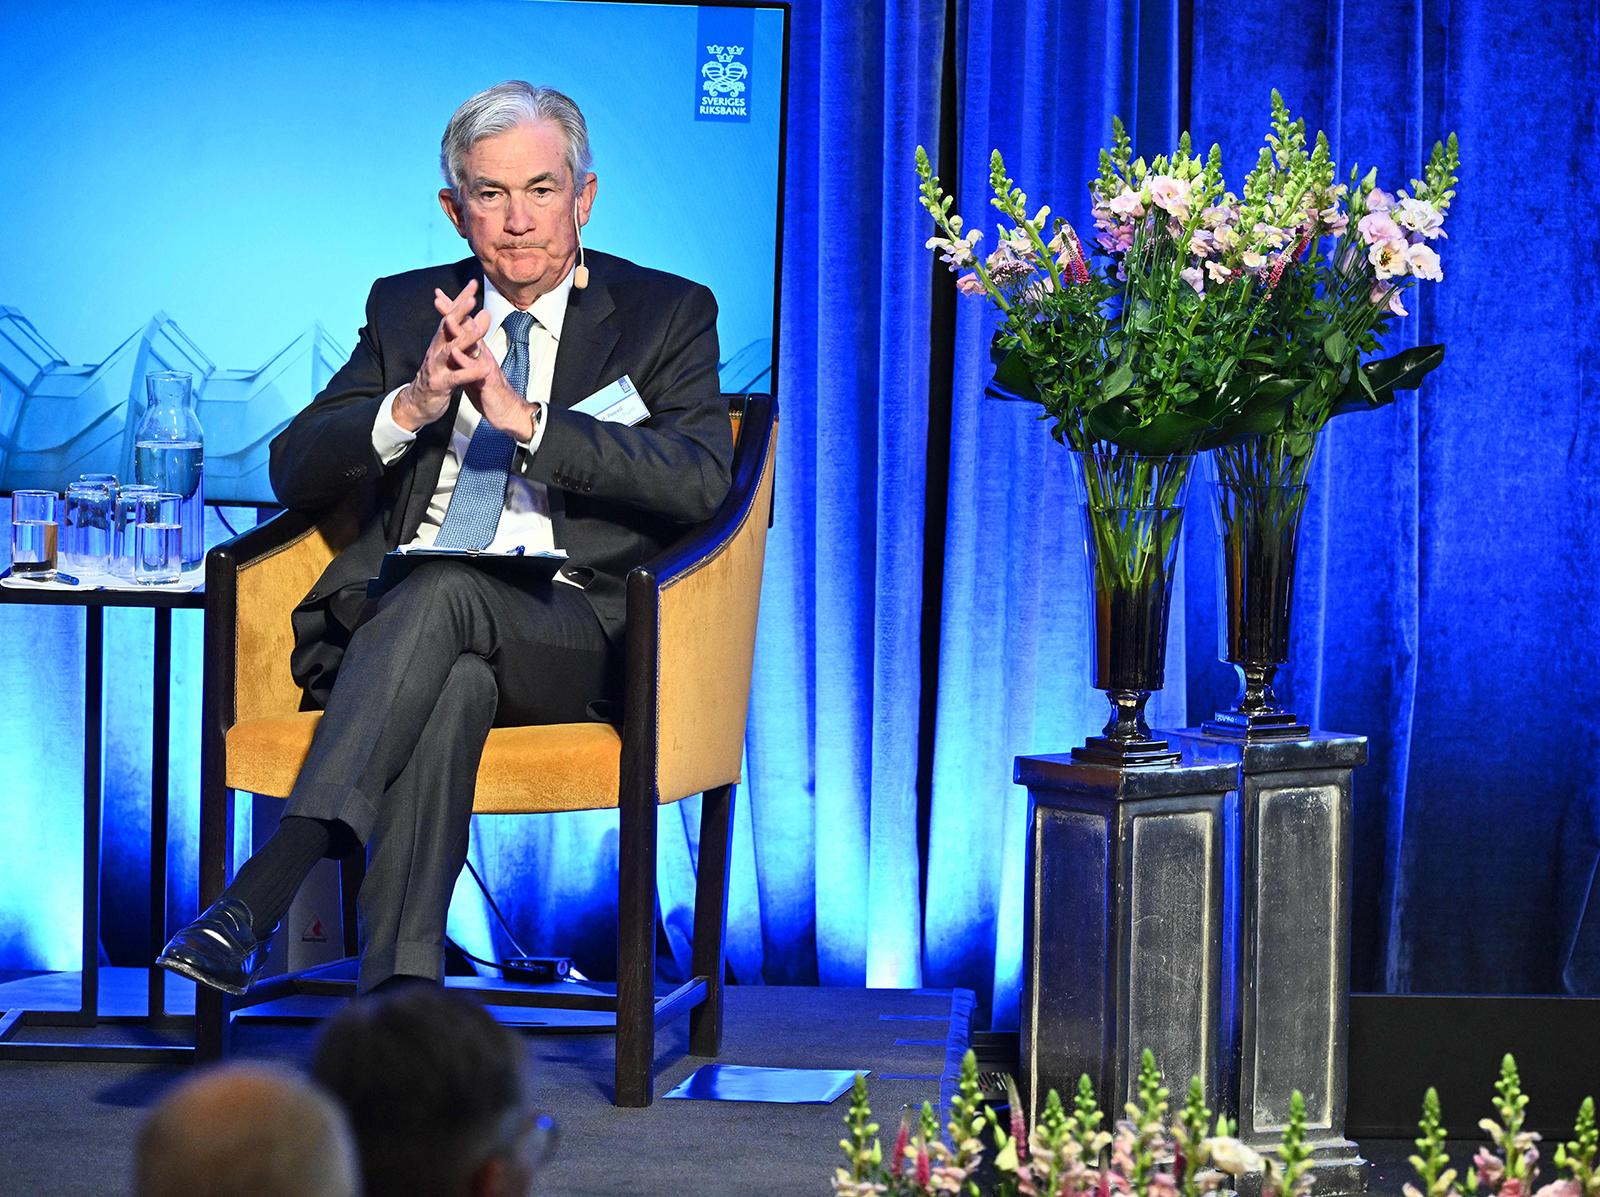 Jerome Powell during a Central Bank Symposium at the Grand Hotel in Stockholm, Sweden on January 10.